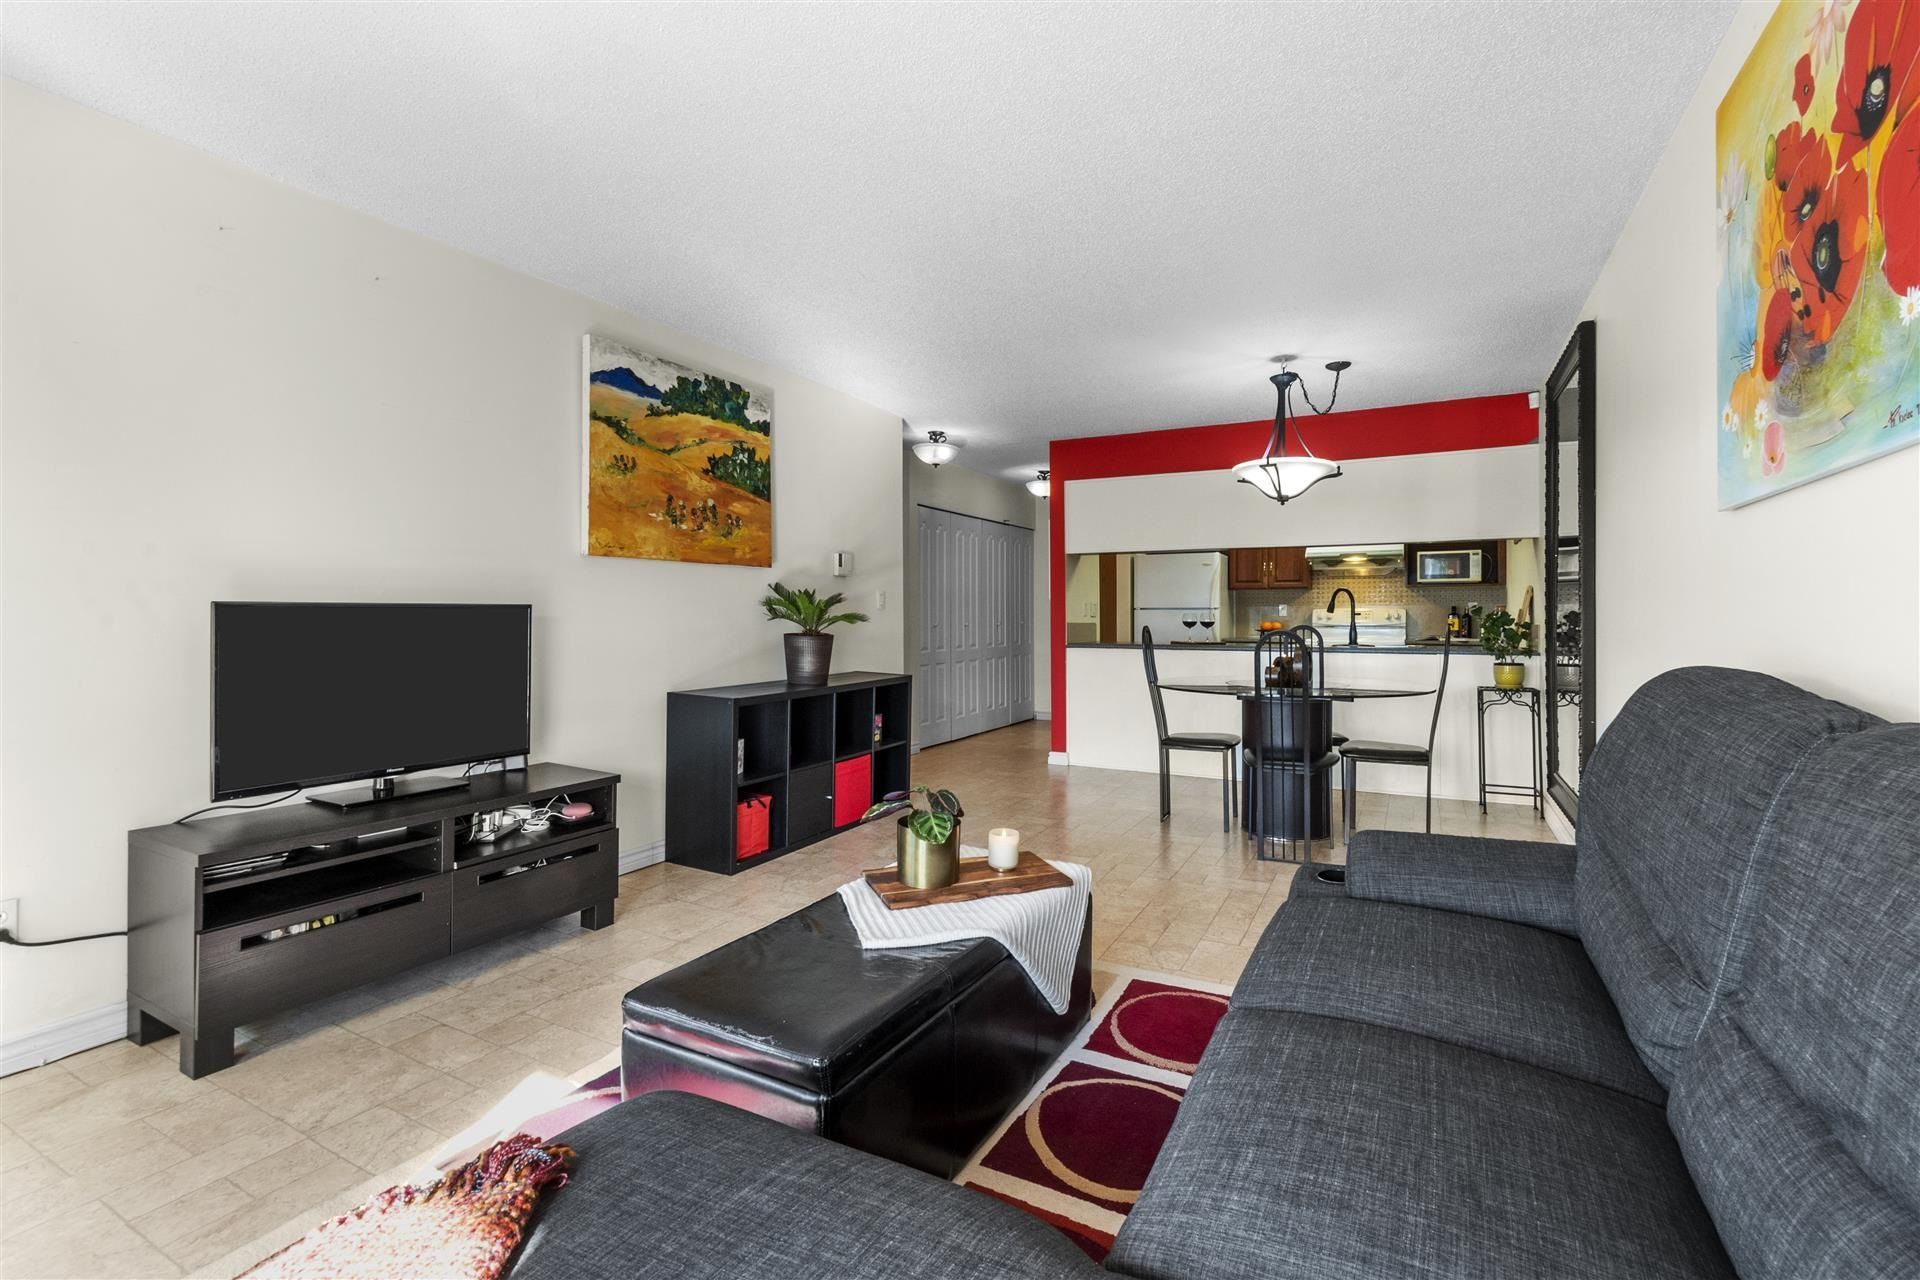 Main Photo: 305 1977 STEPHENS Street in Vancouver: Kitsilano Condo for sale (Vancouver West)  : MLS®# R2660146